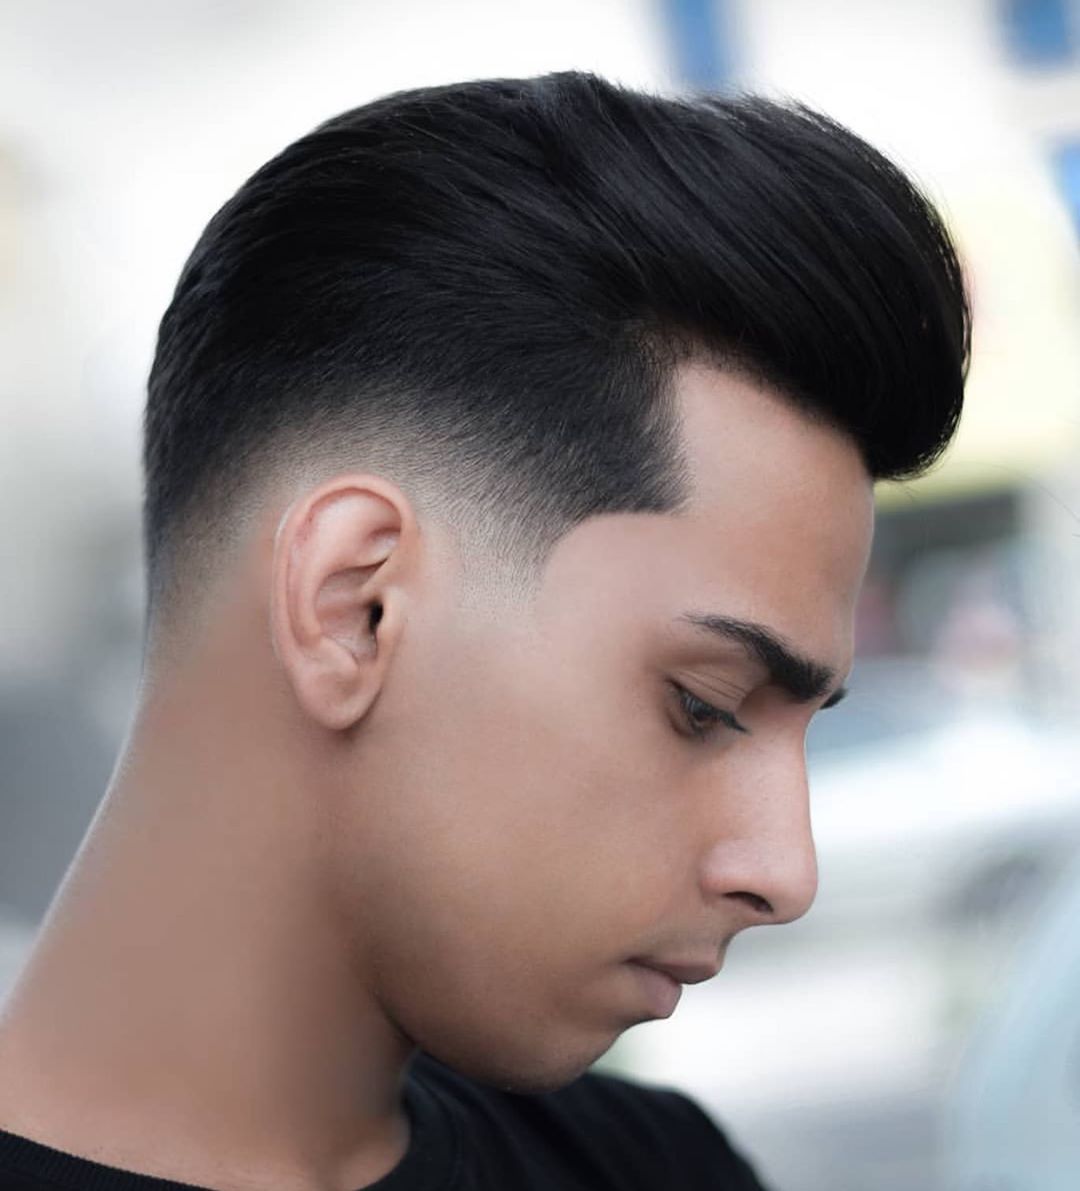 60 Best Young Men's Haircuts | The latest young men's hairstyles 2020